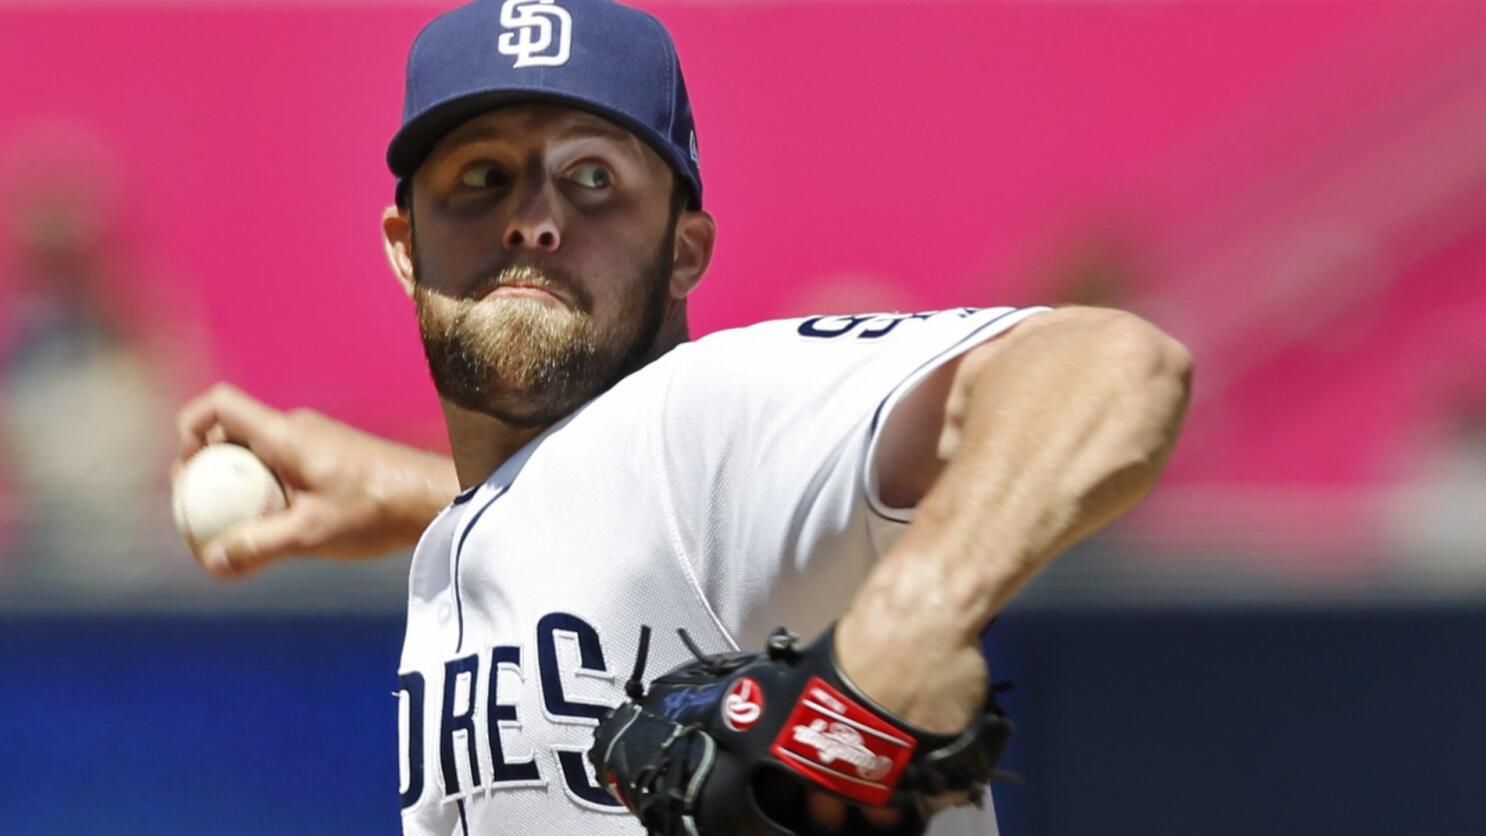 Padres pitcher Paddack looks forward to showing off lion